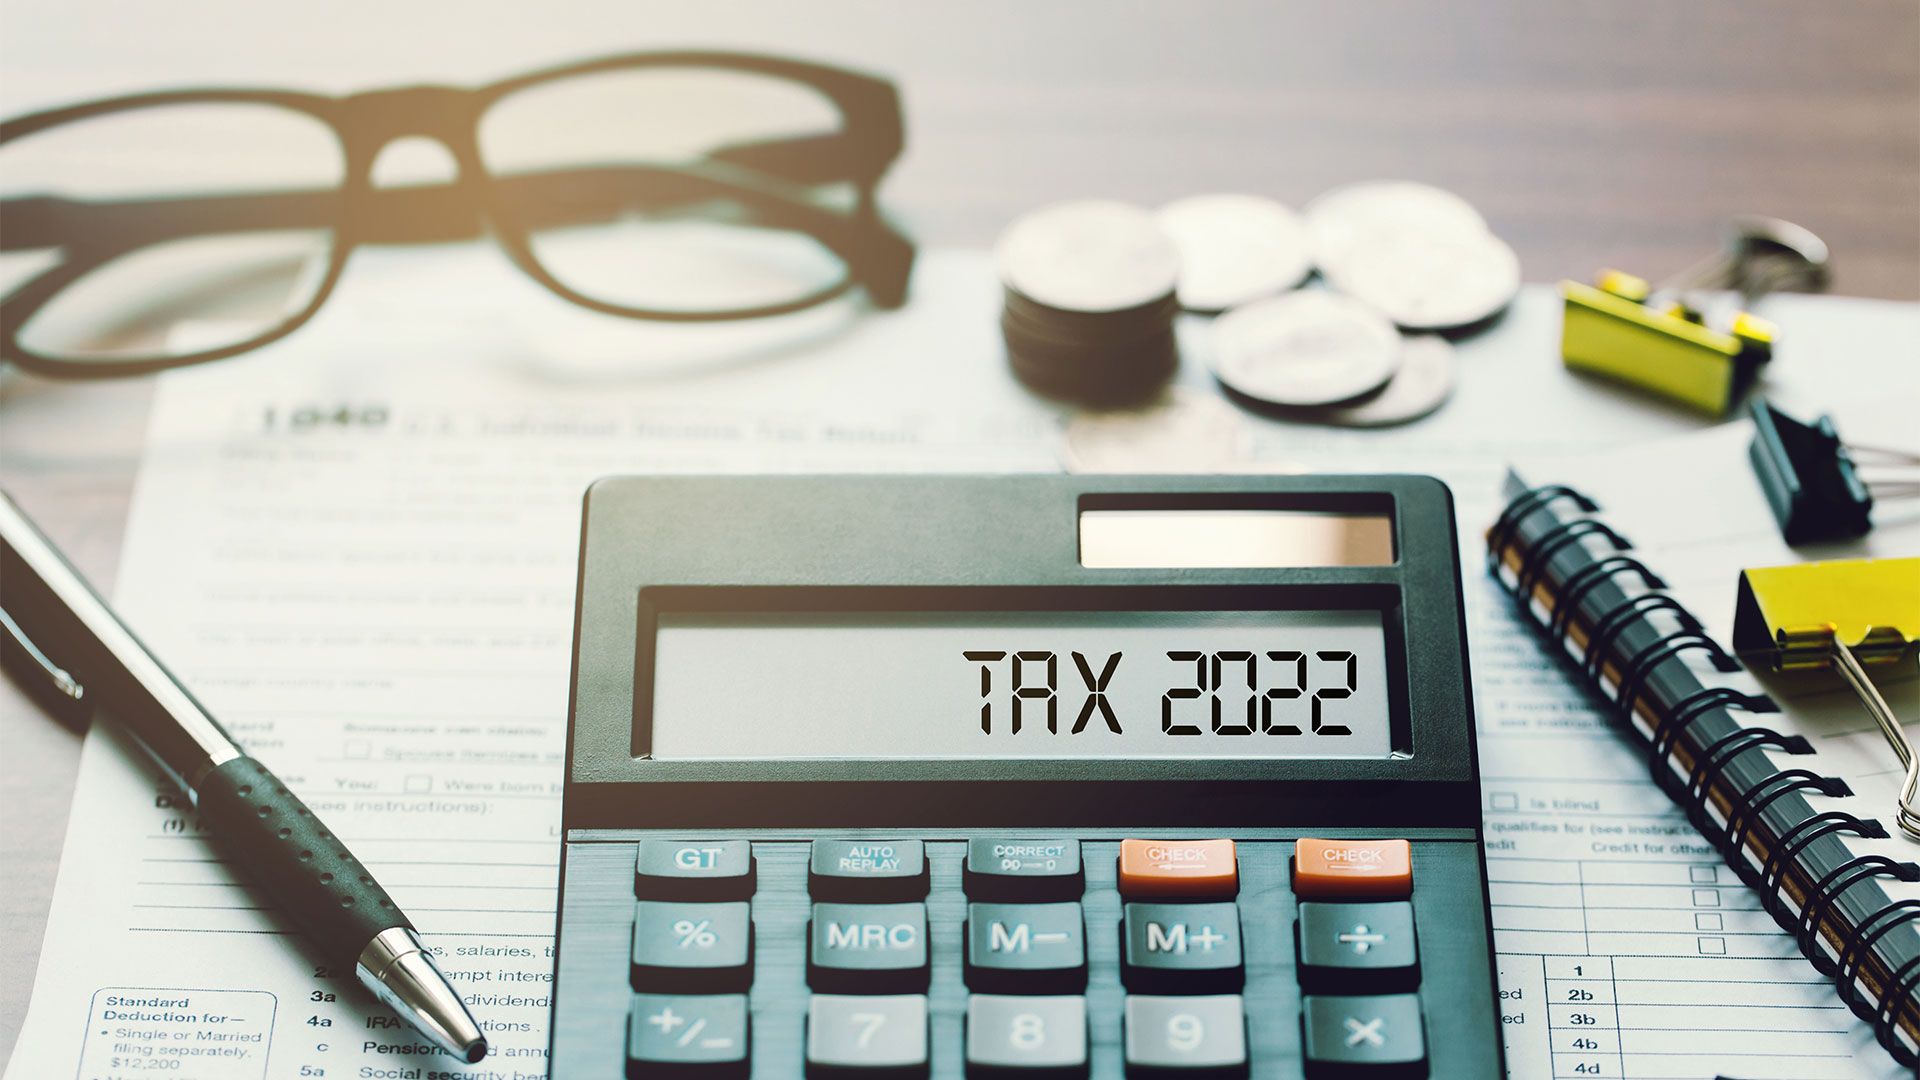 Tax 2022 being worked out on calculator